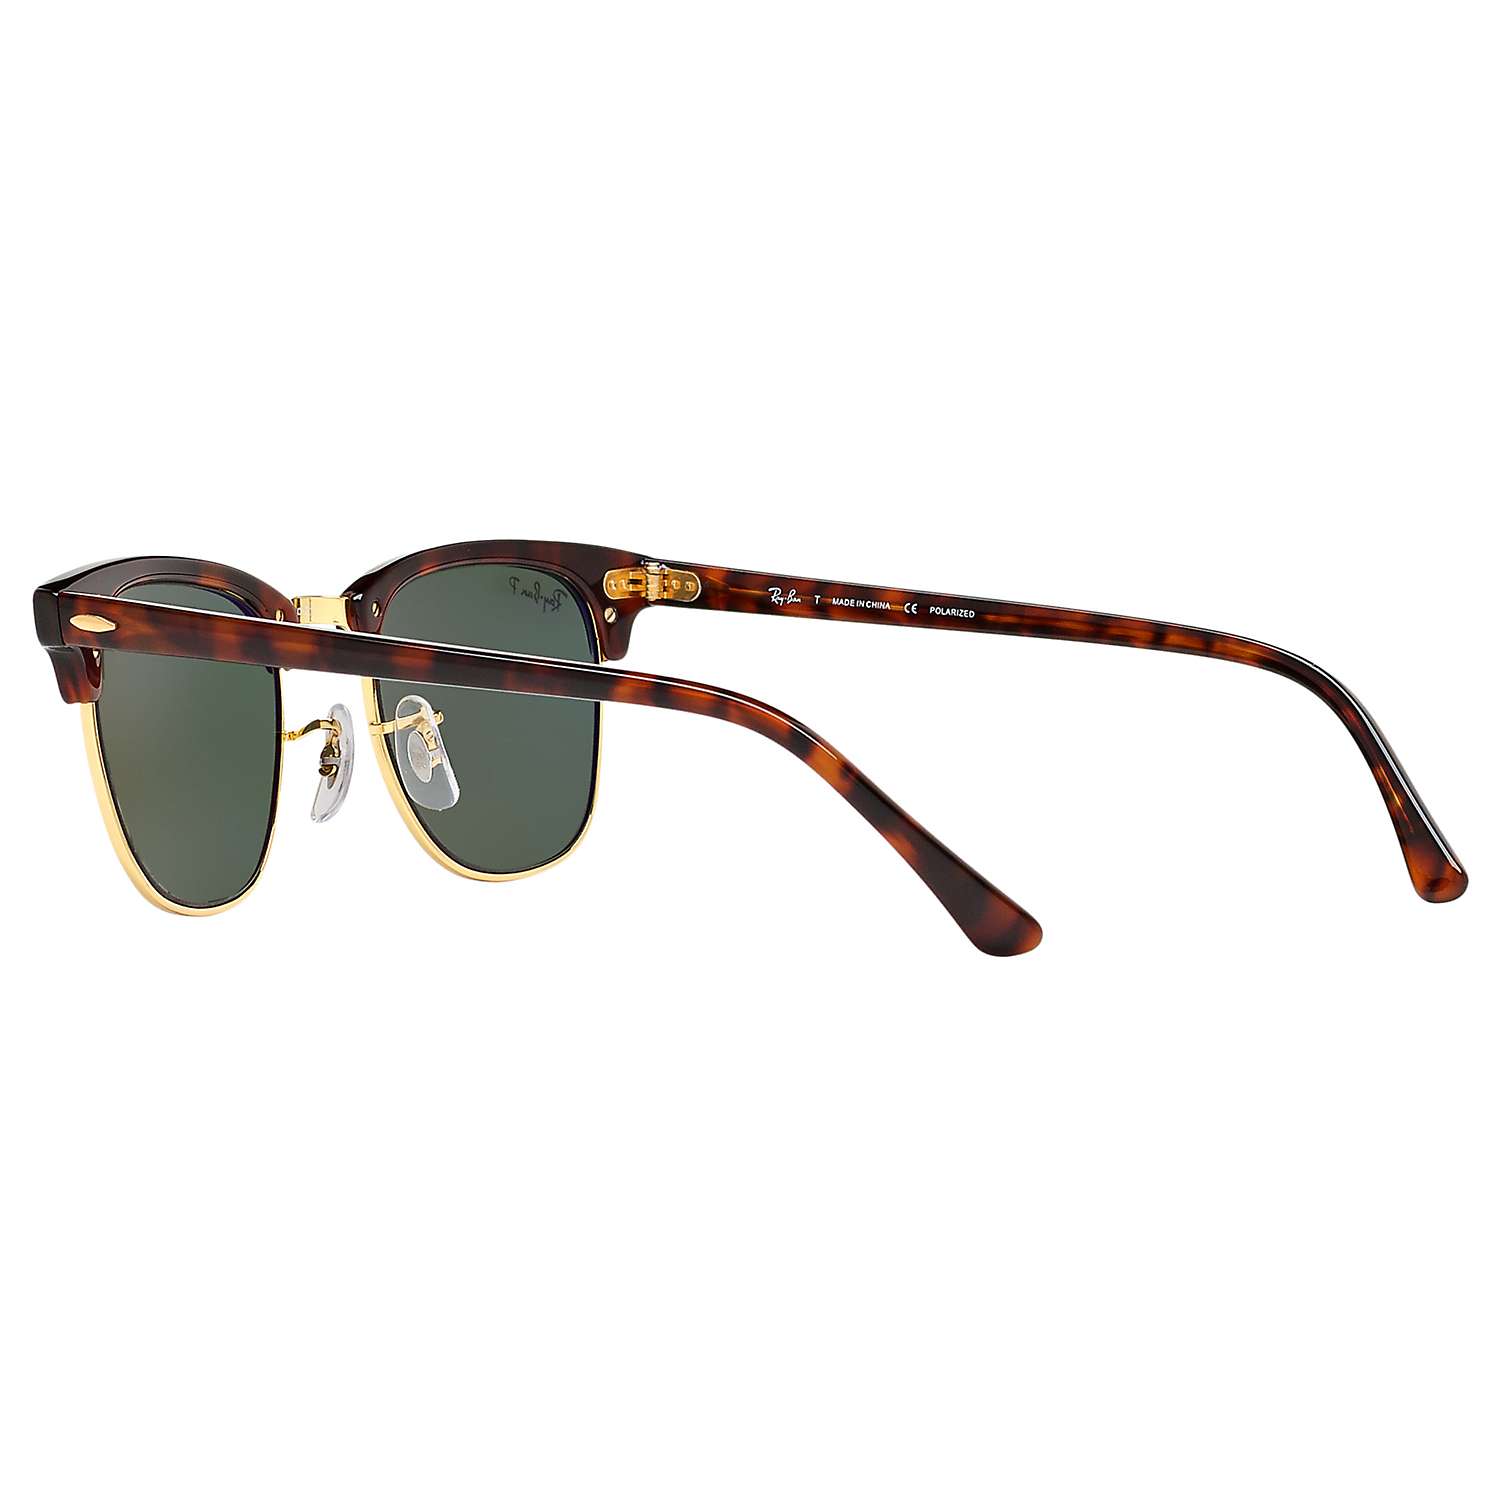 Buy Ray-Ban RB3016 Men's Polarised Clubmaster Sunglasses, Tortoise/Green Online at johnlewis.com